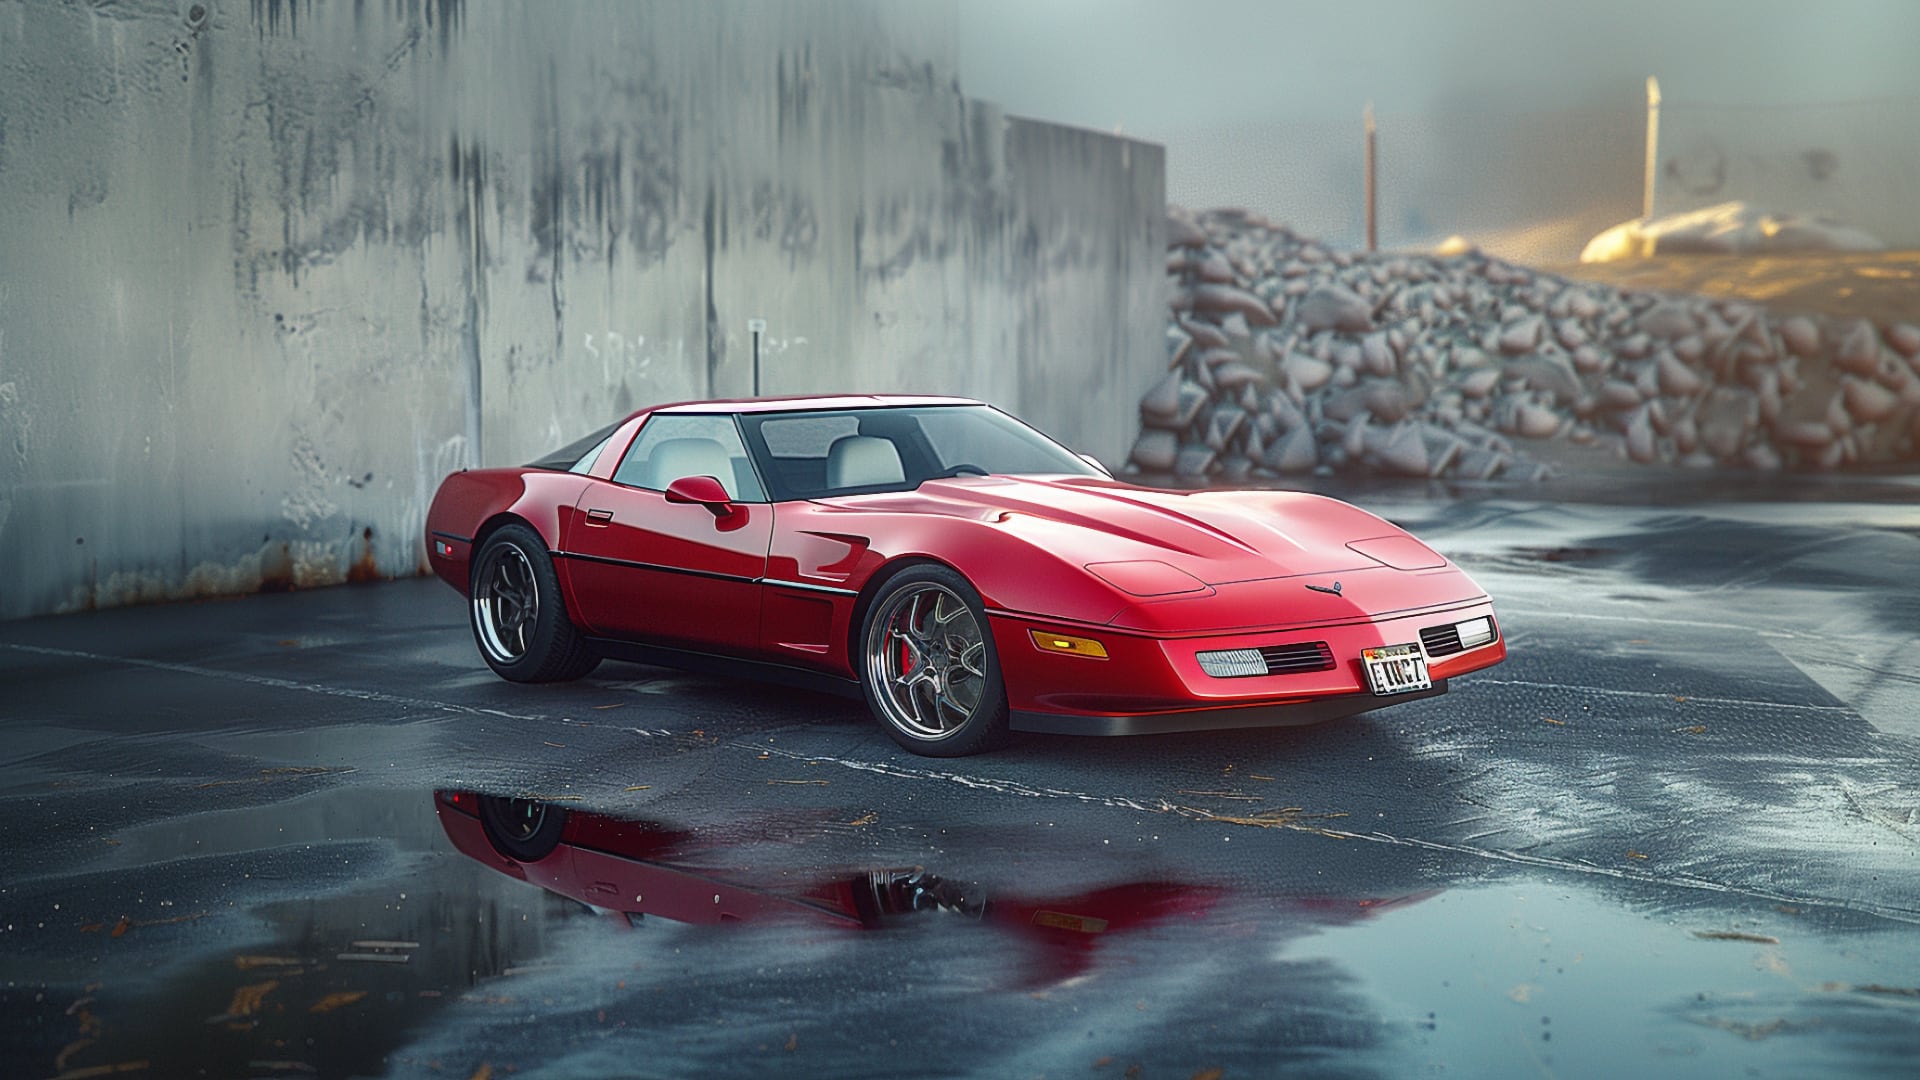 A red Chevrolet Corvette C4 parked in front of a building.